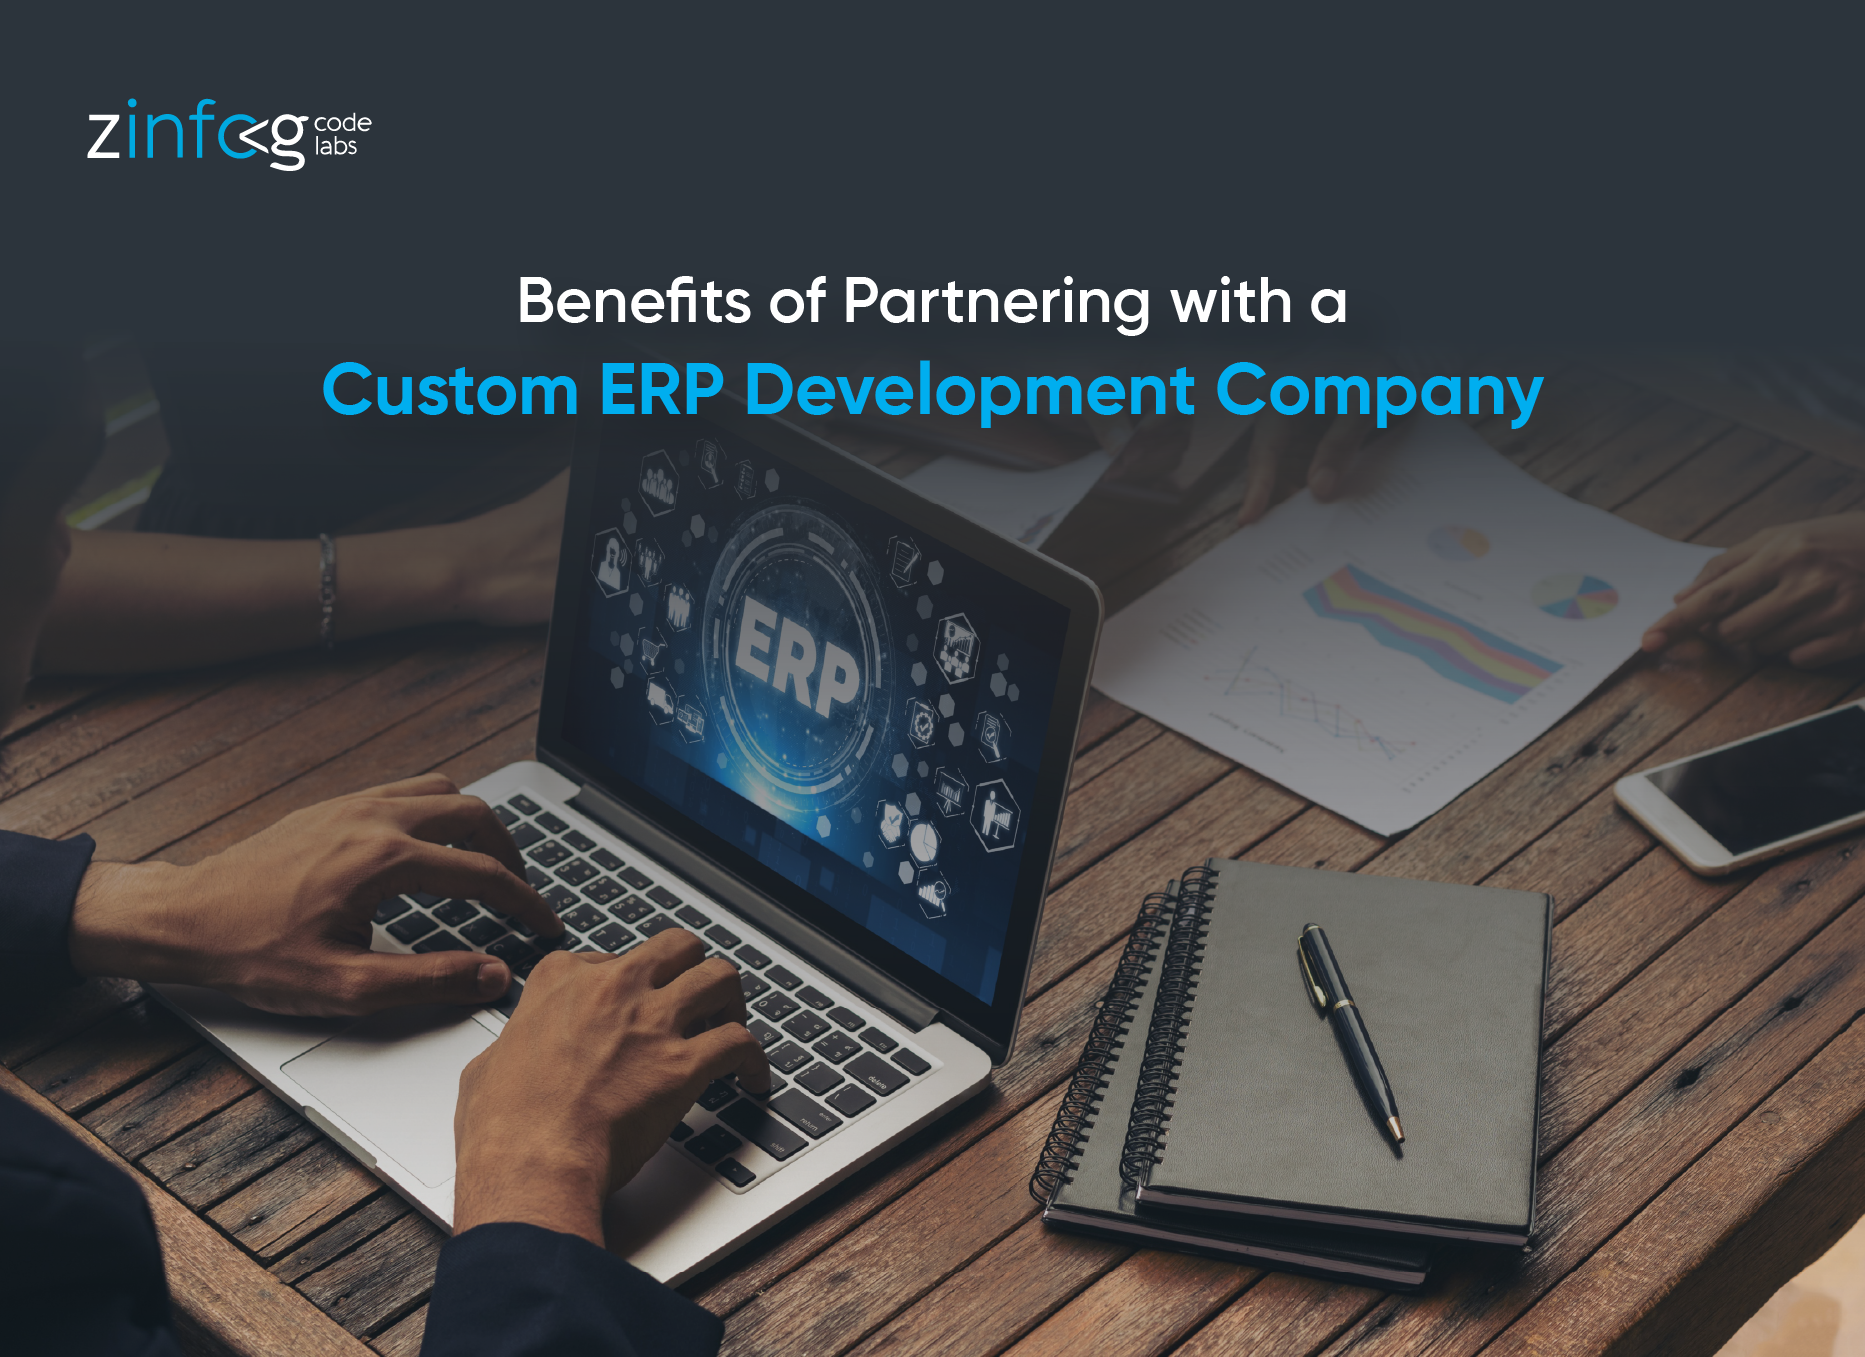 benefits-of-partnering-with-a-custom-erp-development-company.html